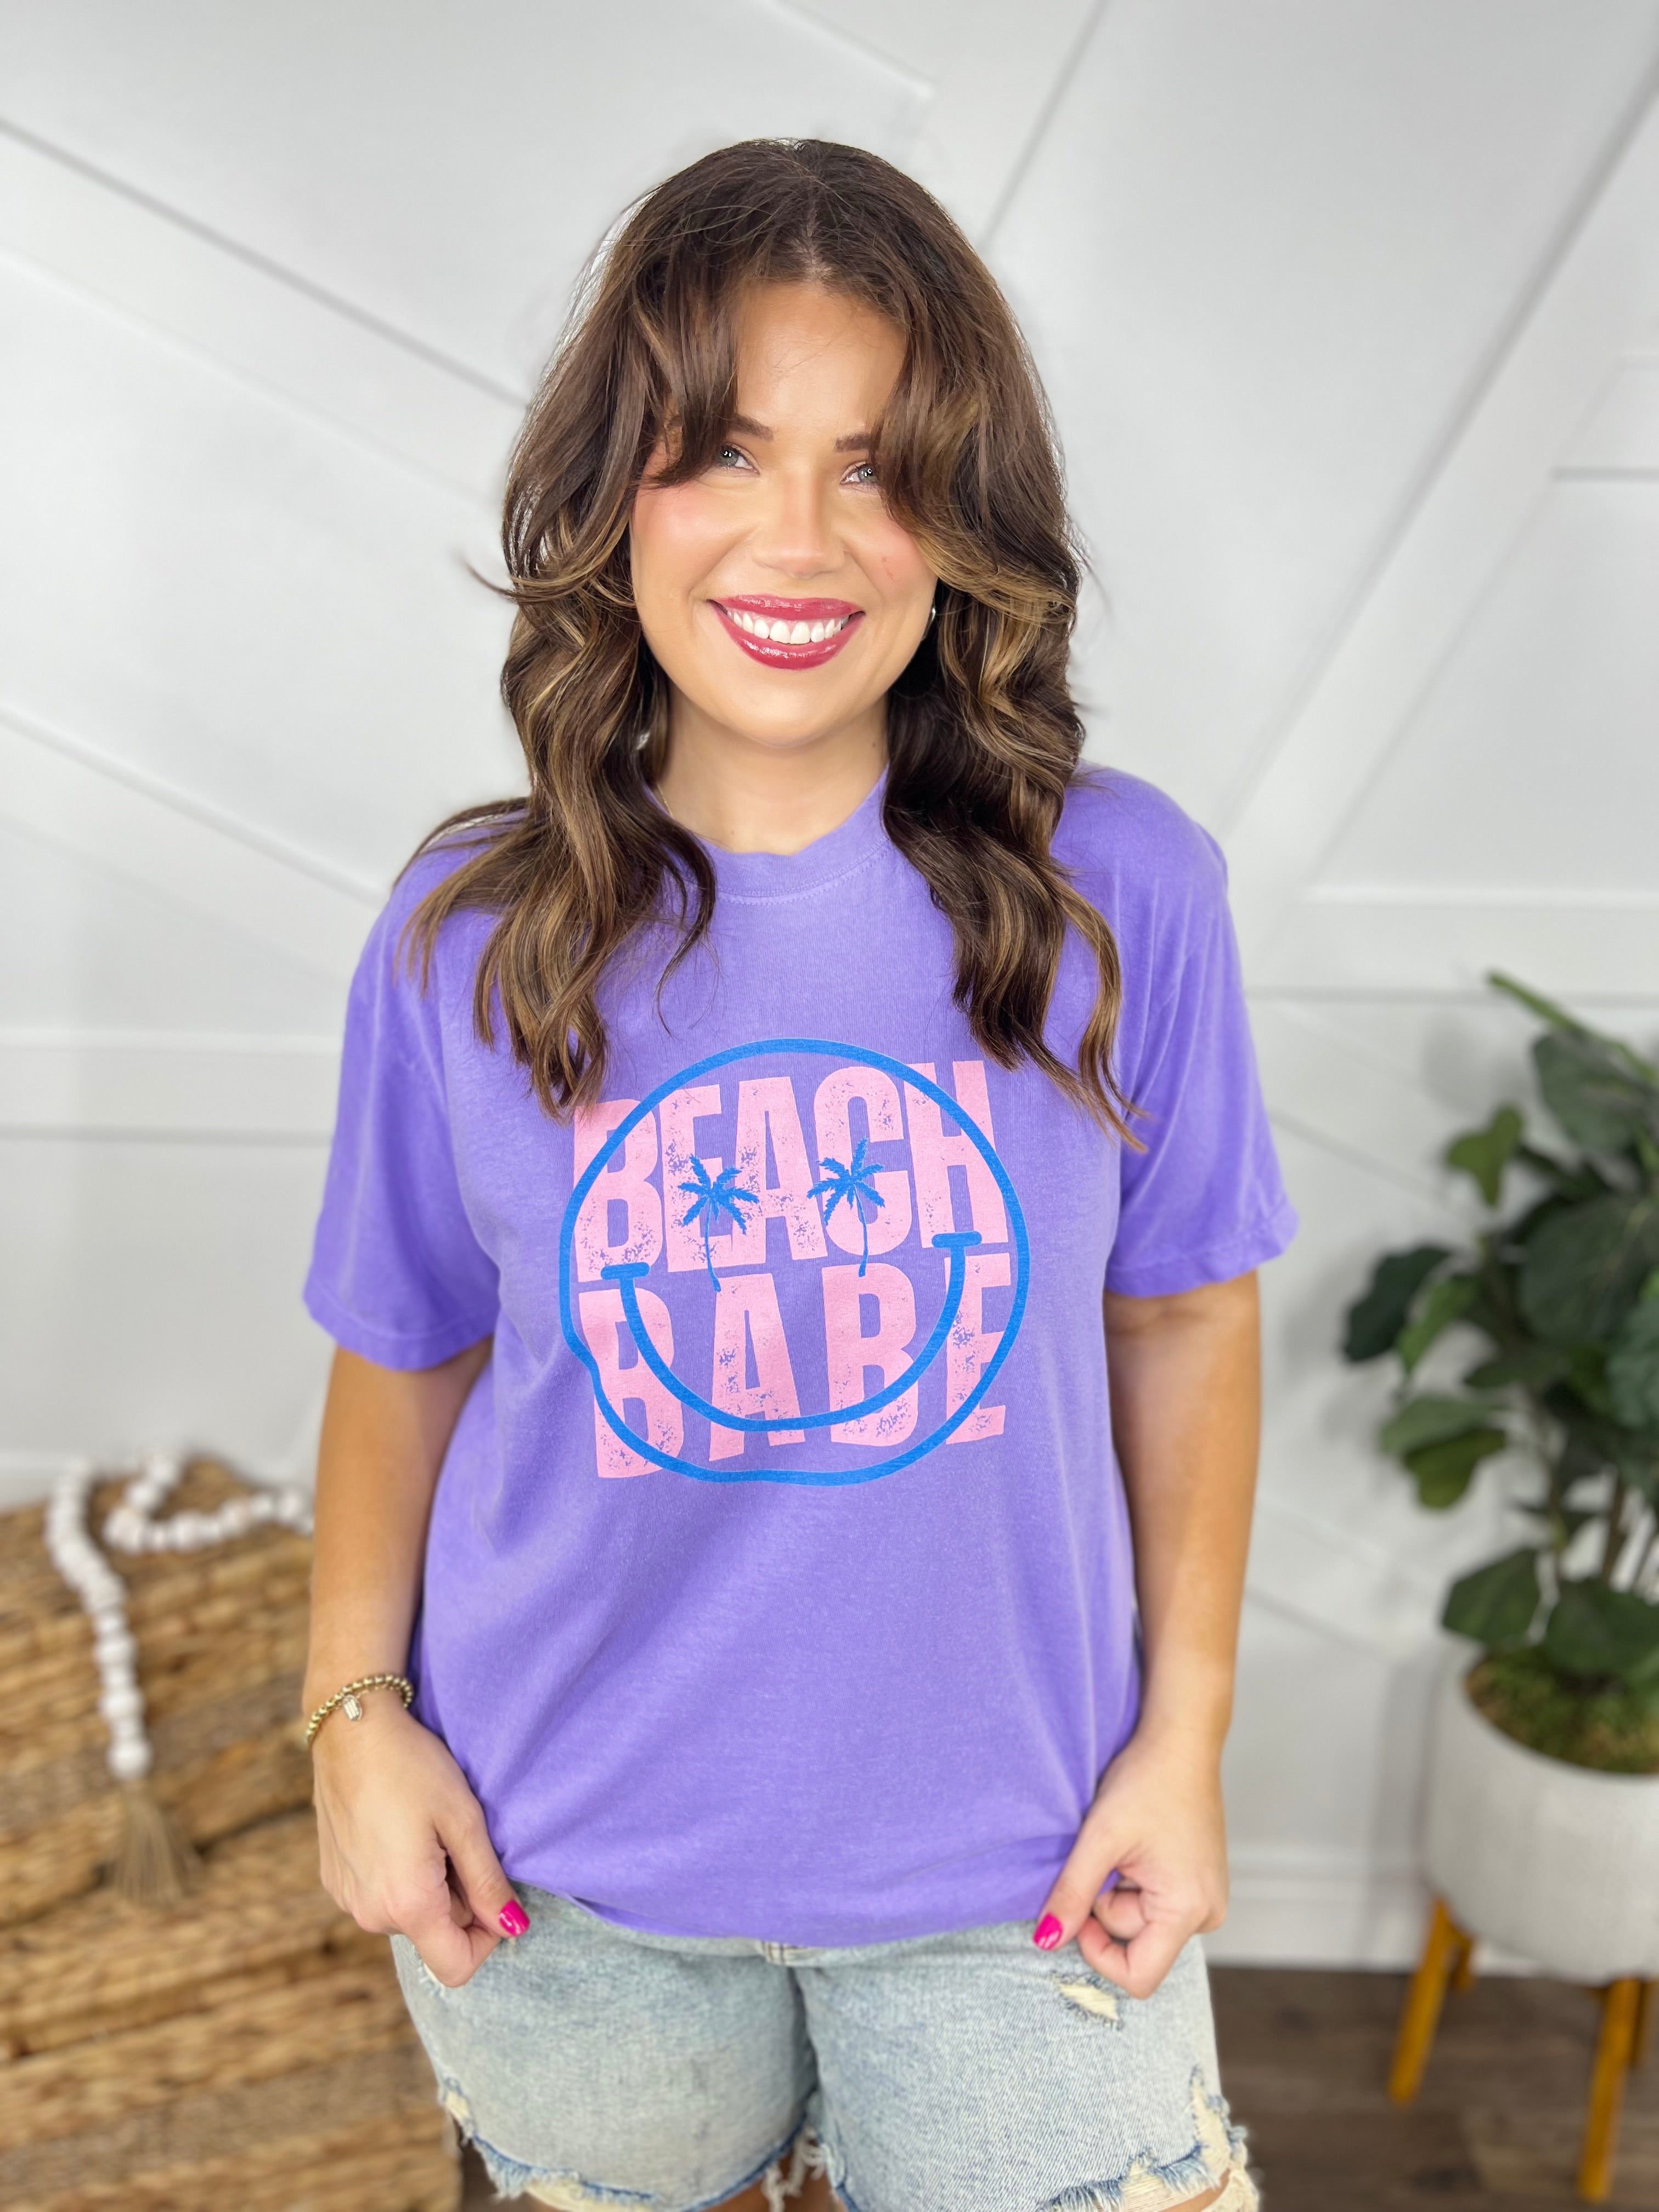 Beach Babes Graphic Tee-130 Graphic Tees-Heathered Boho-Heathered Boho Boutique, Women's Fashion and Accessories in Palmetto, FL